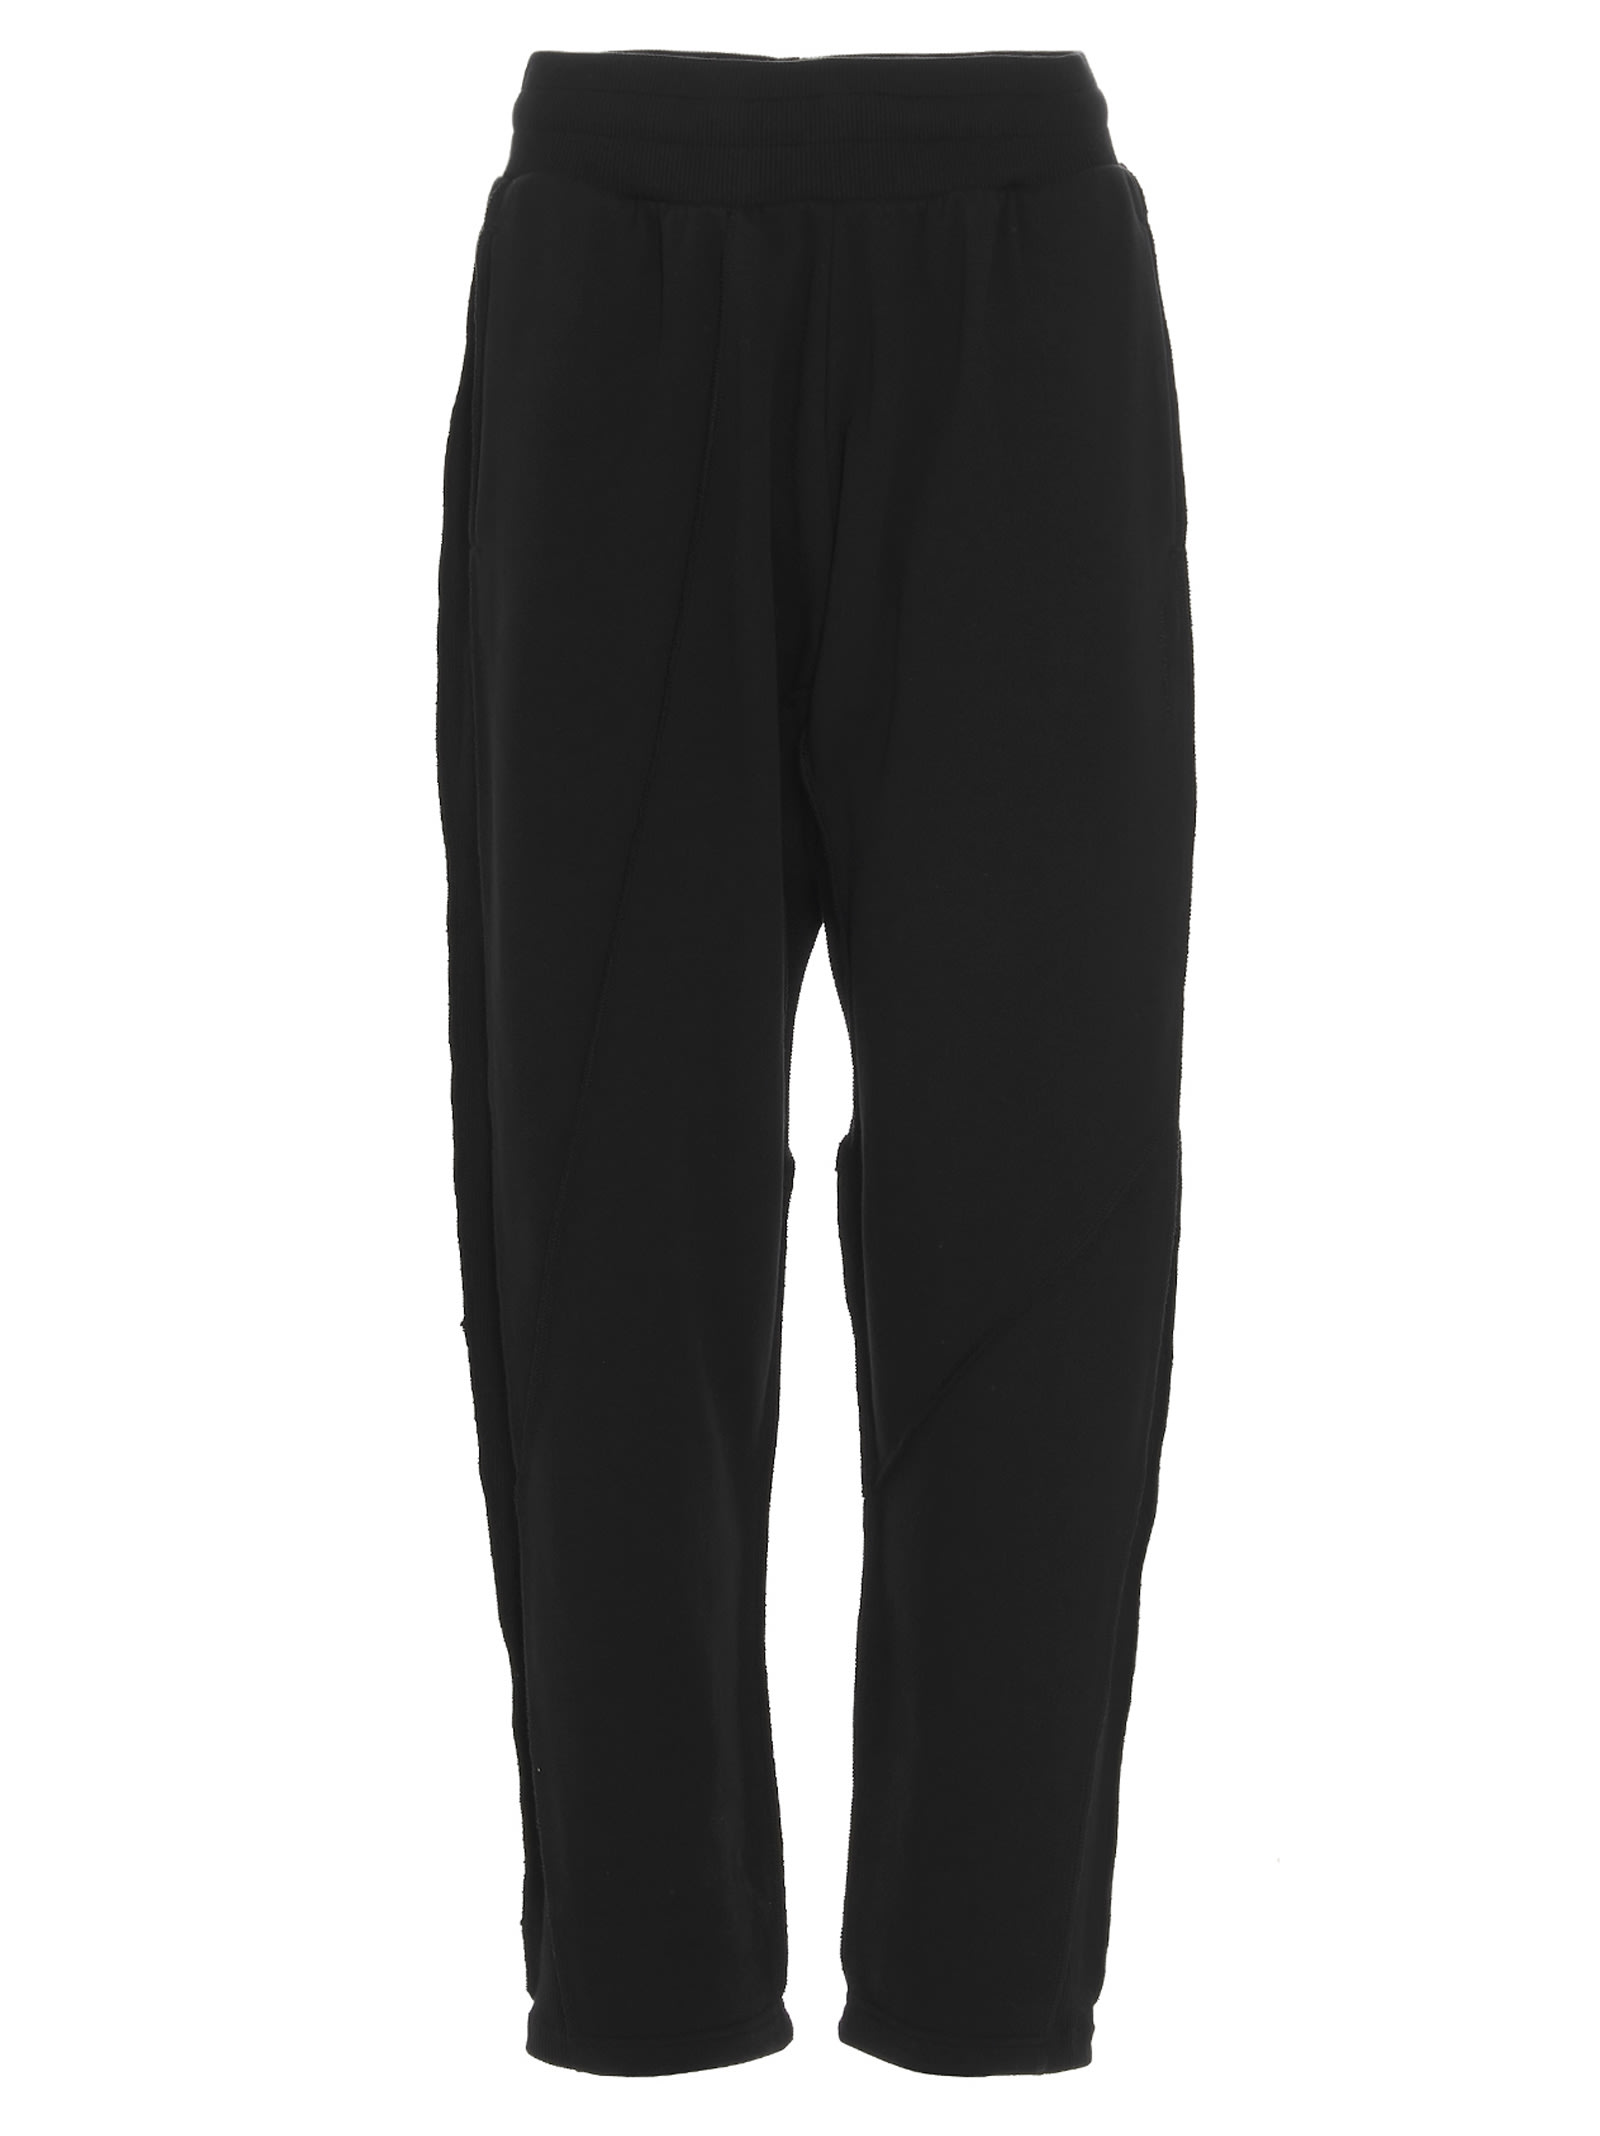 A-cold-wall dissection Pants